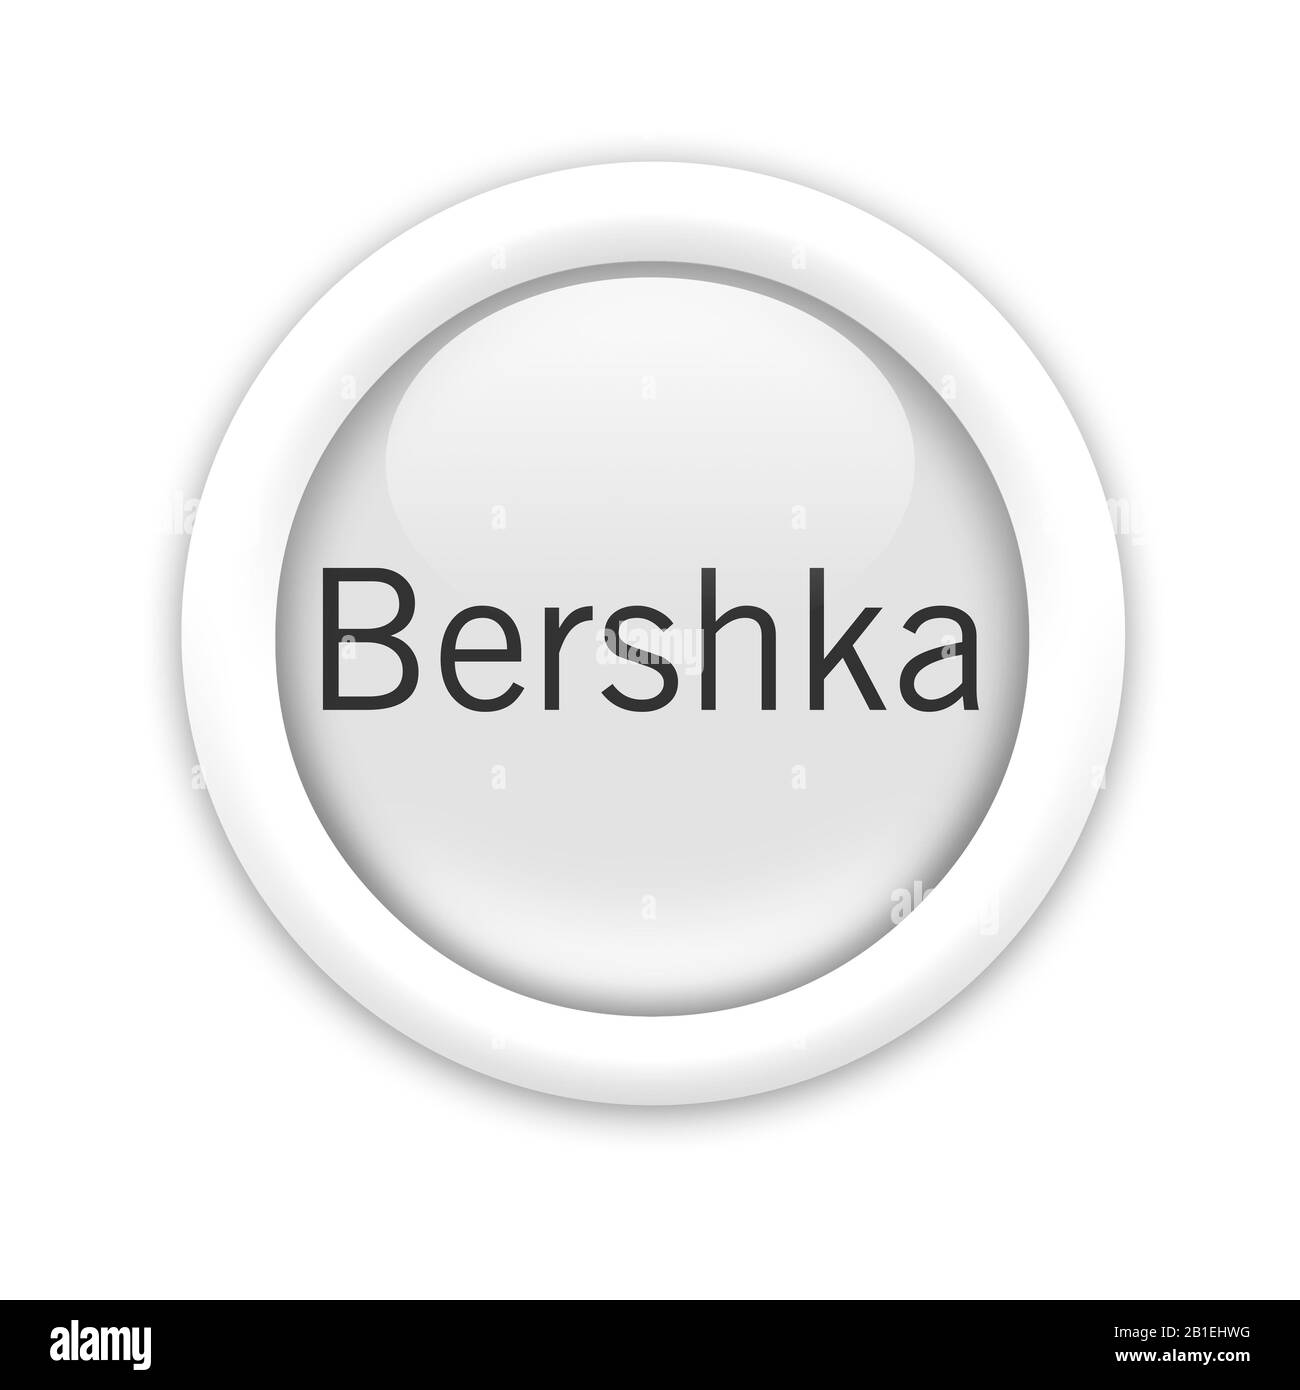 Bershka logo Cut Out Stock Images & Pictures - Alamy